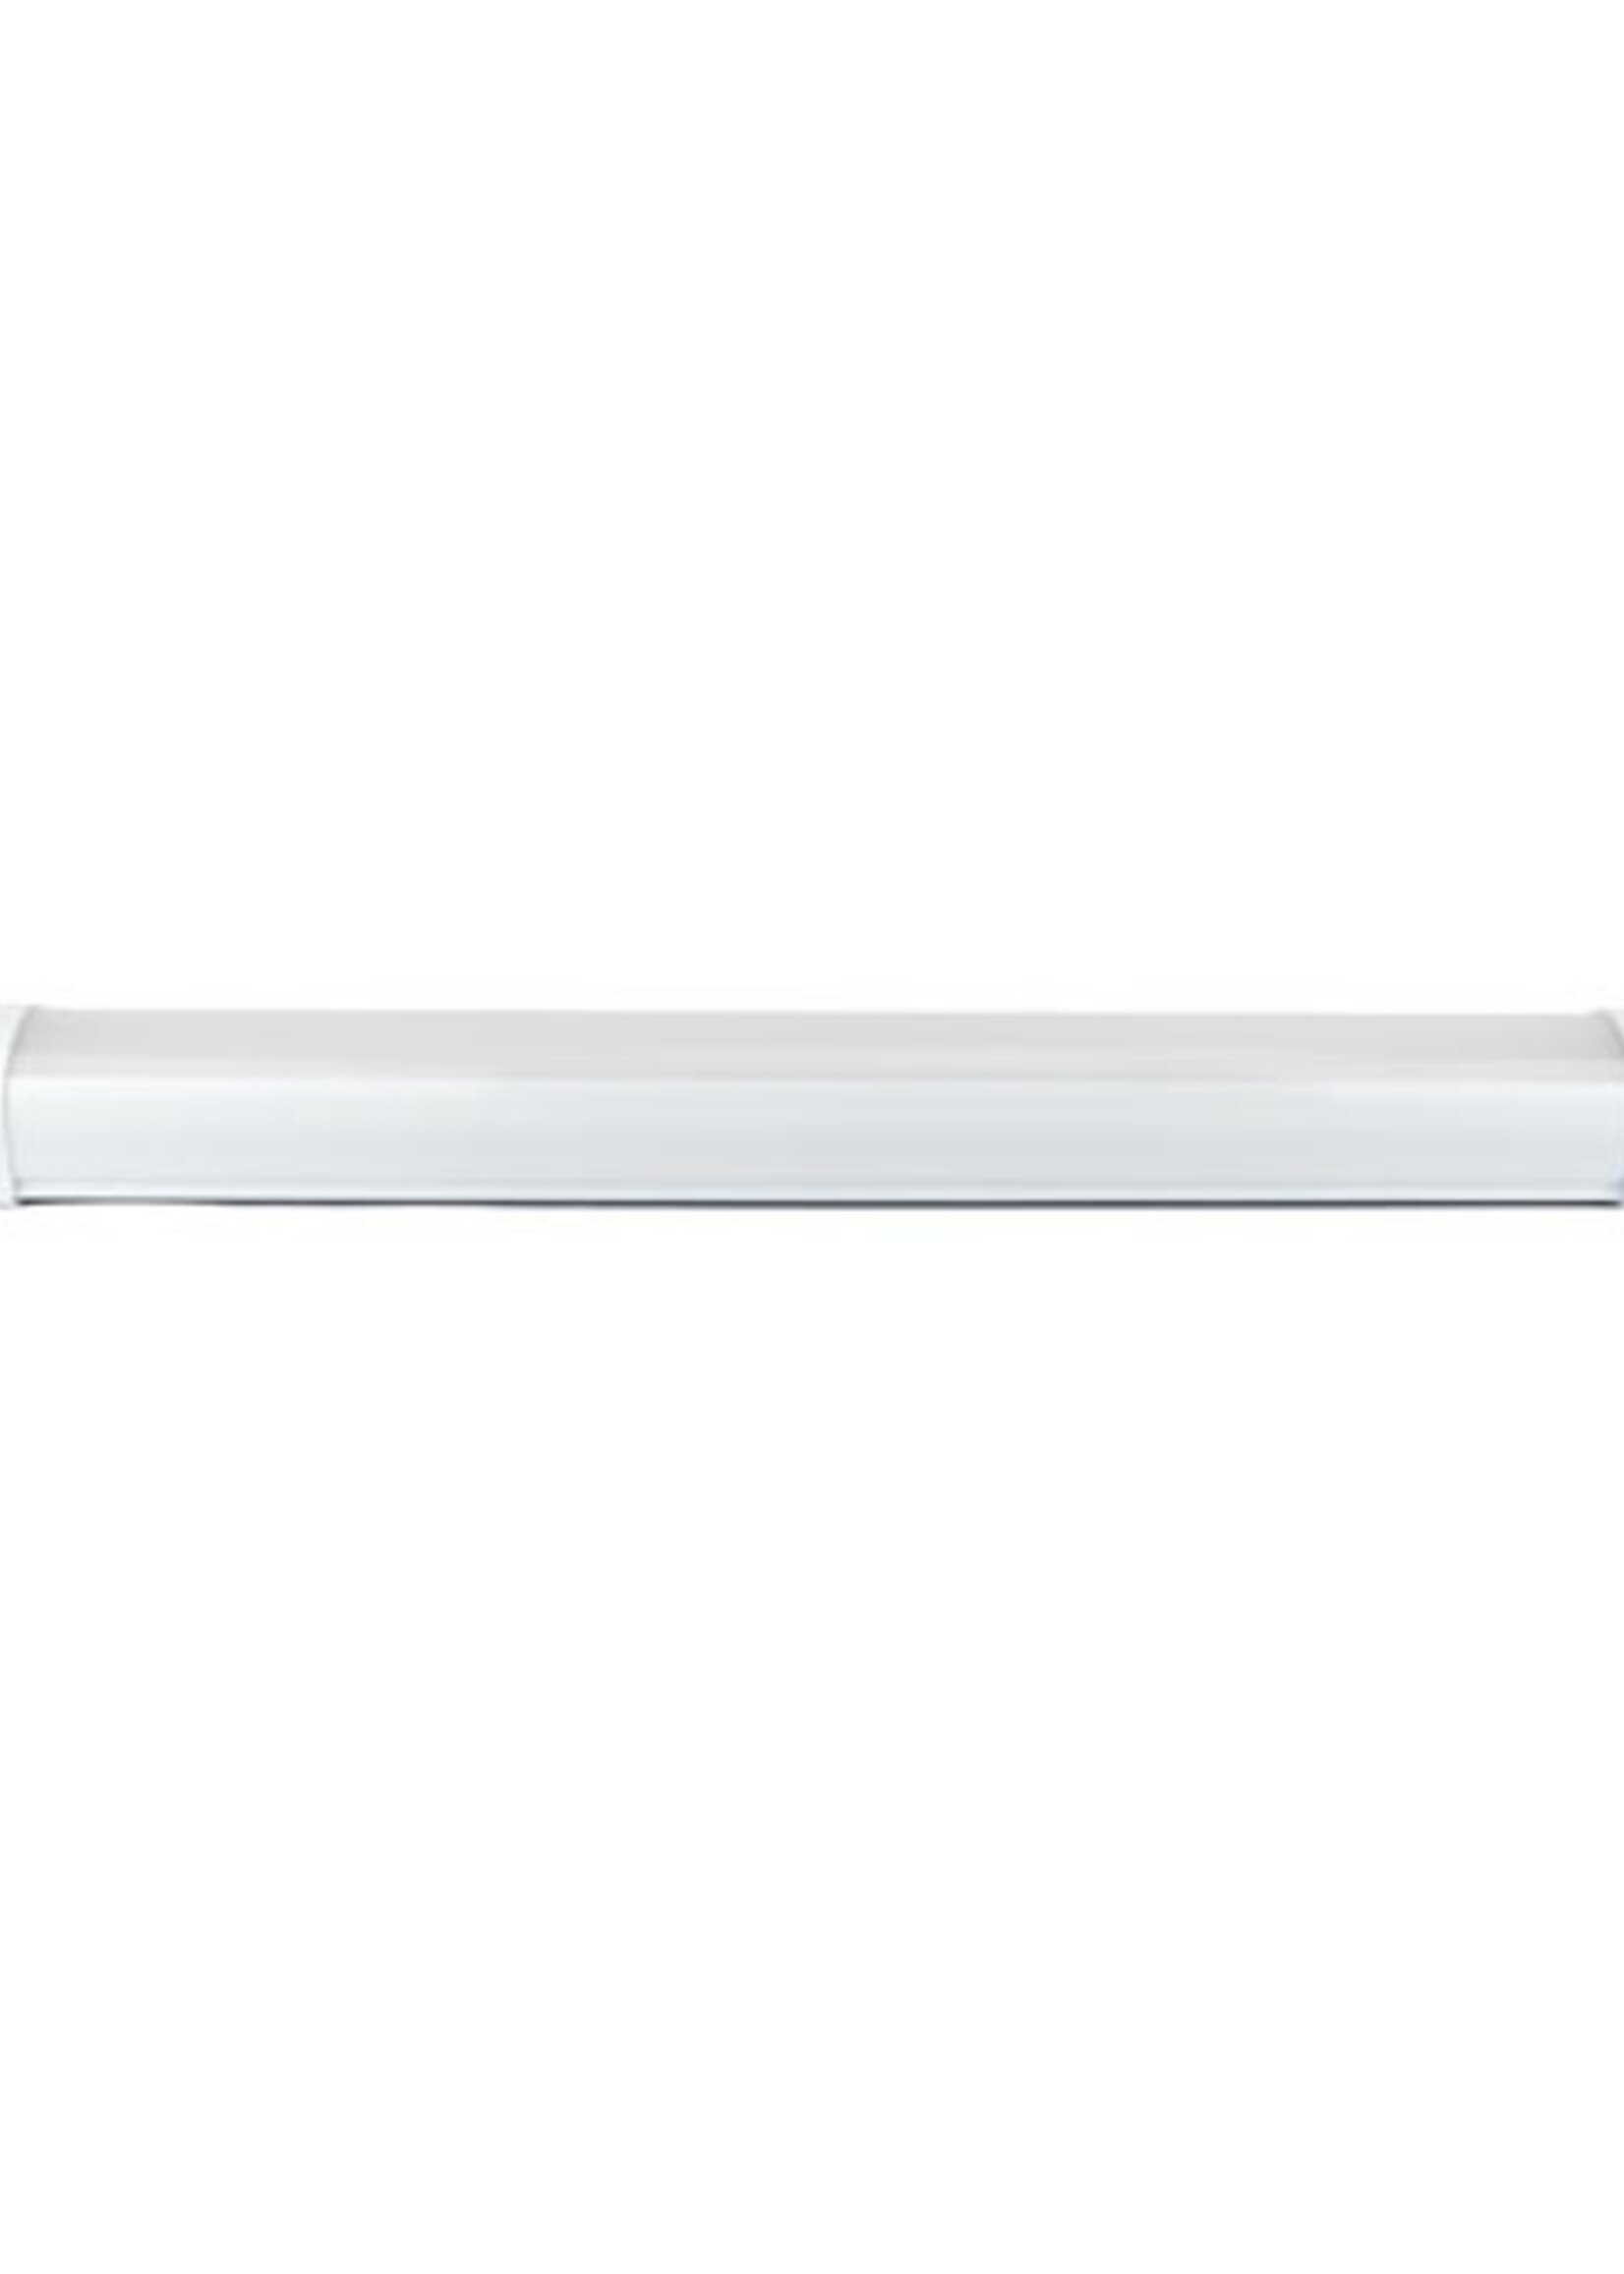 Philips CertaDrive LED Tri-proof IP65 water resistant 150cm 50W Philips driver